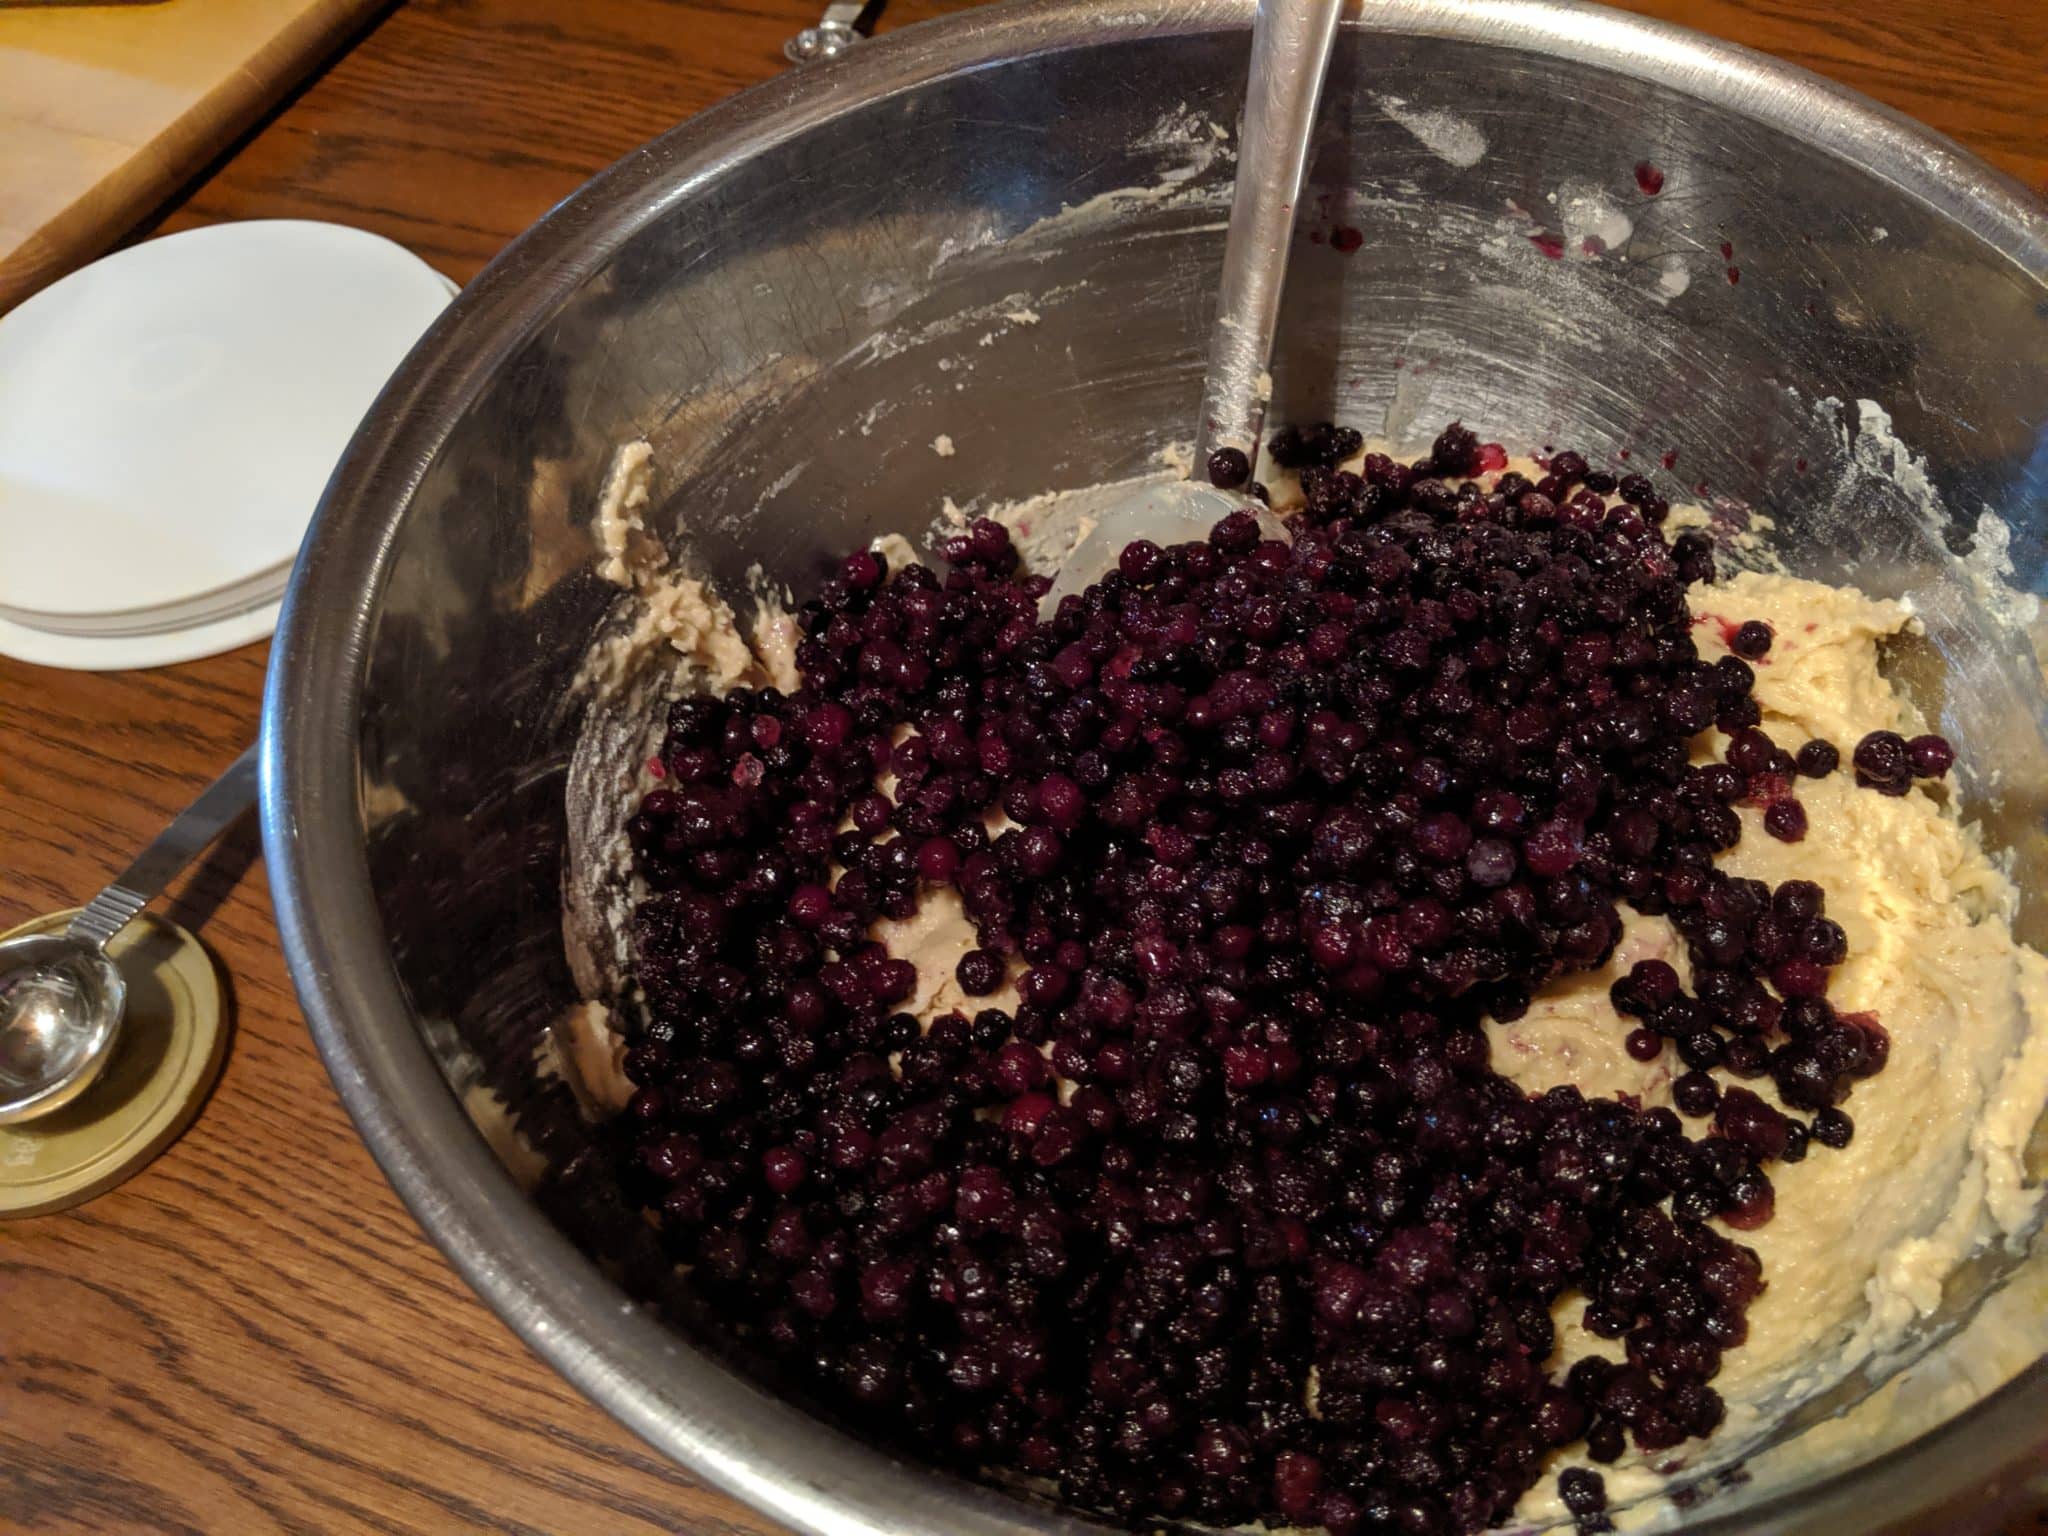 muffin batter in bowl with blueberries just added